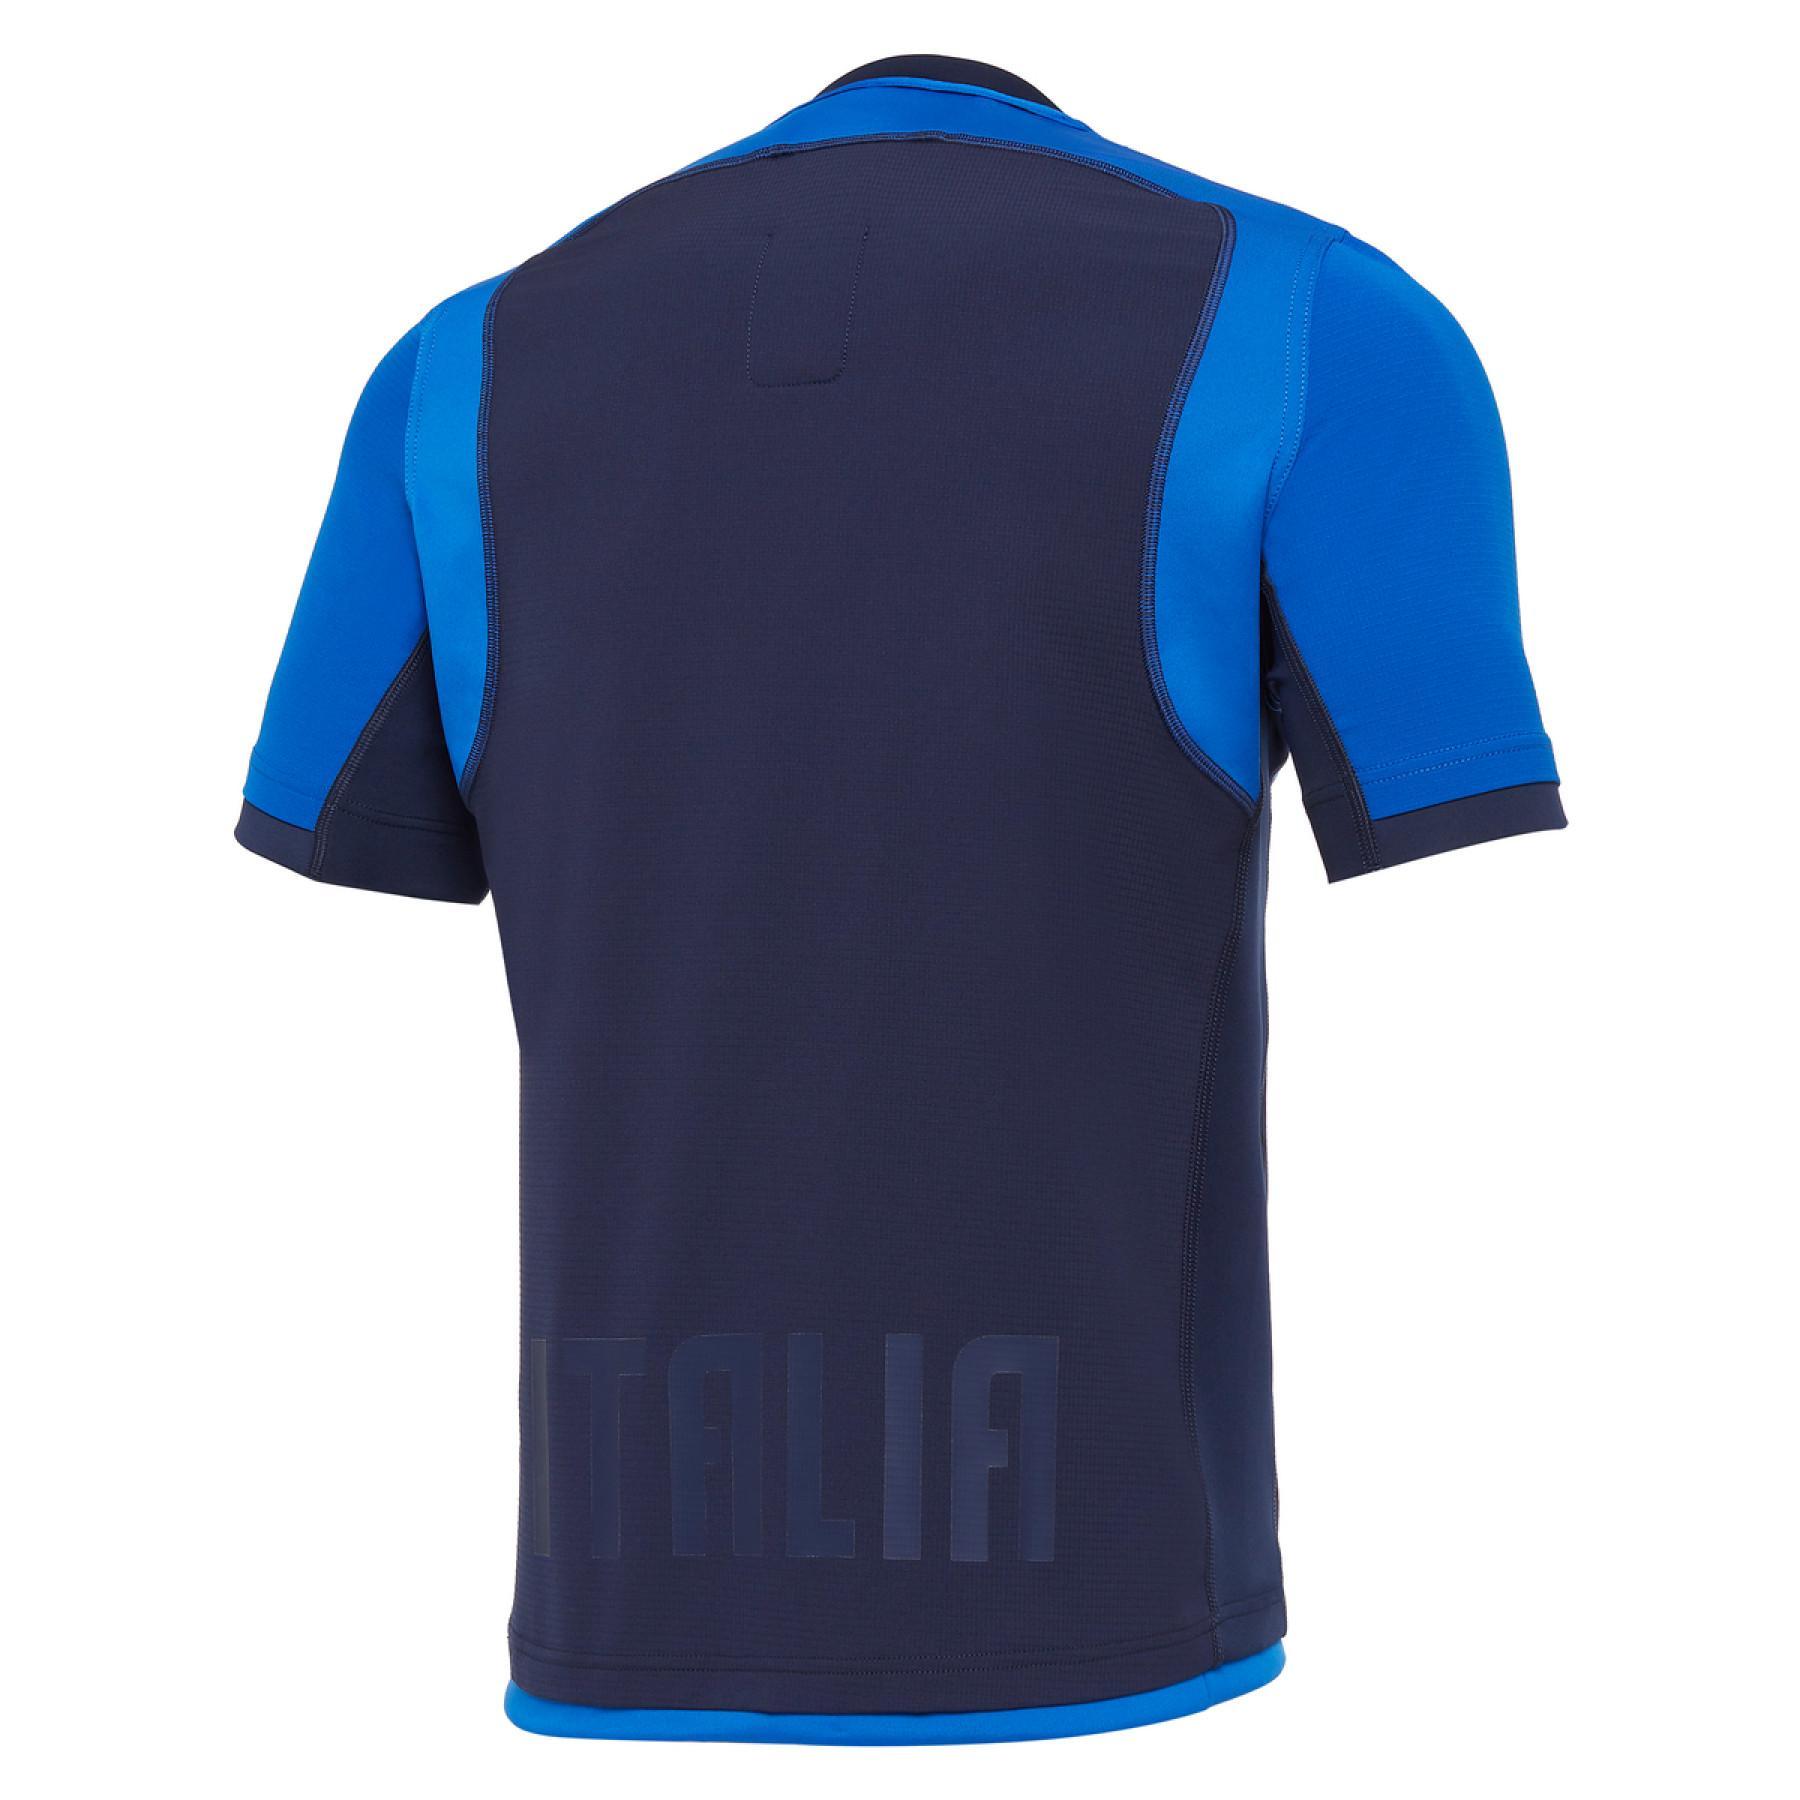 Camisola Italie rugby 2020/21